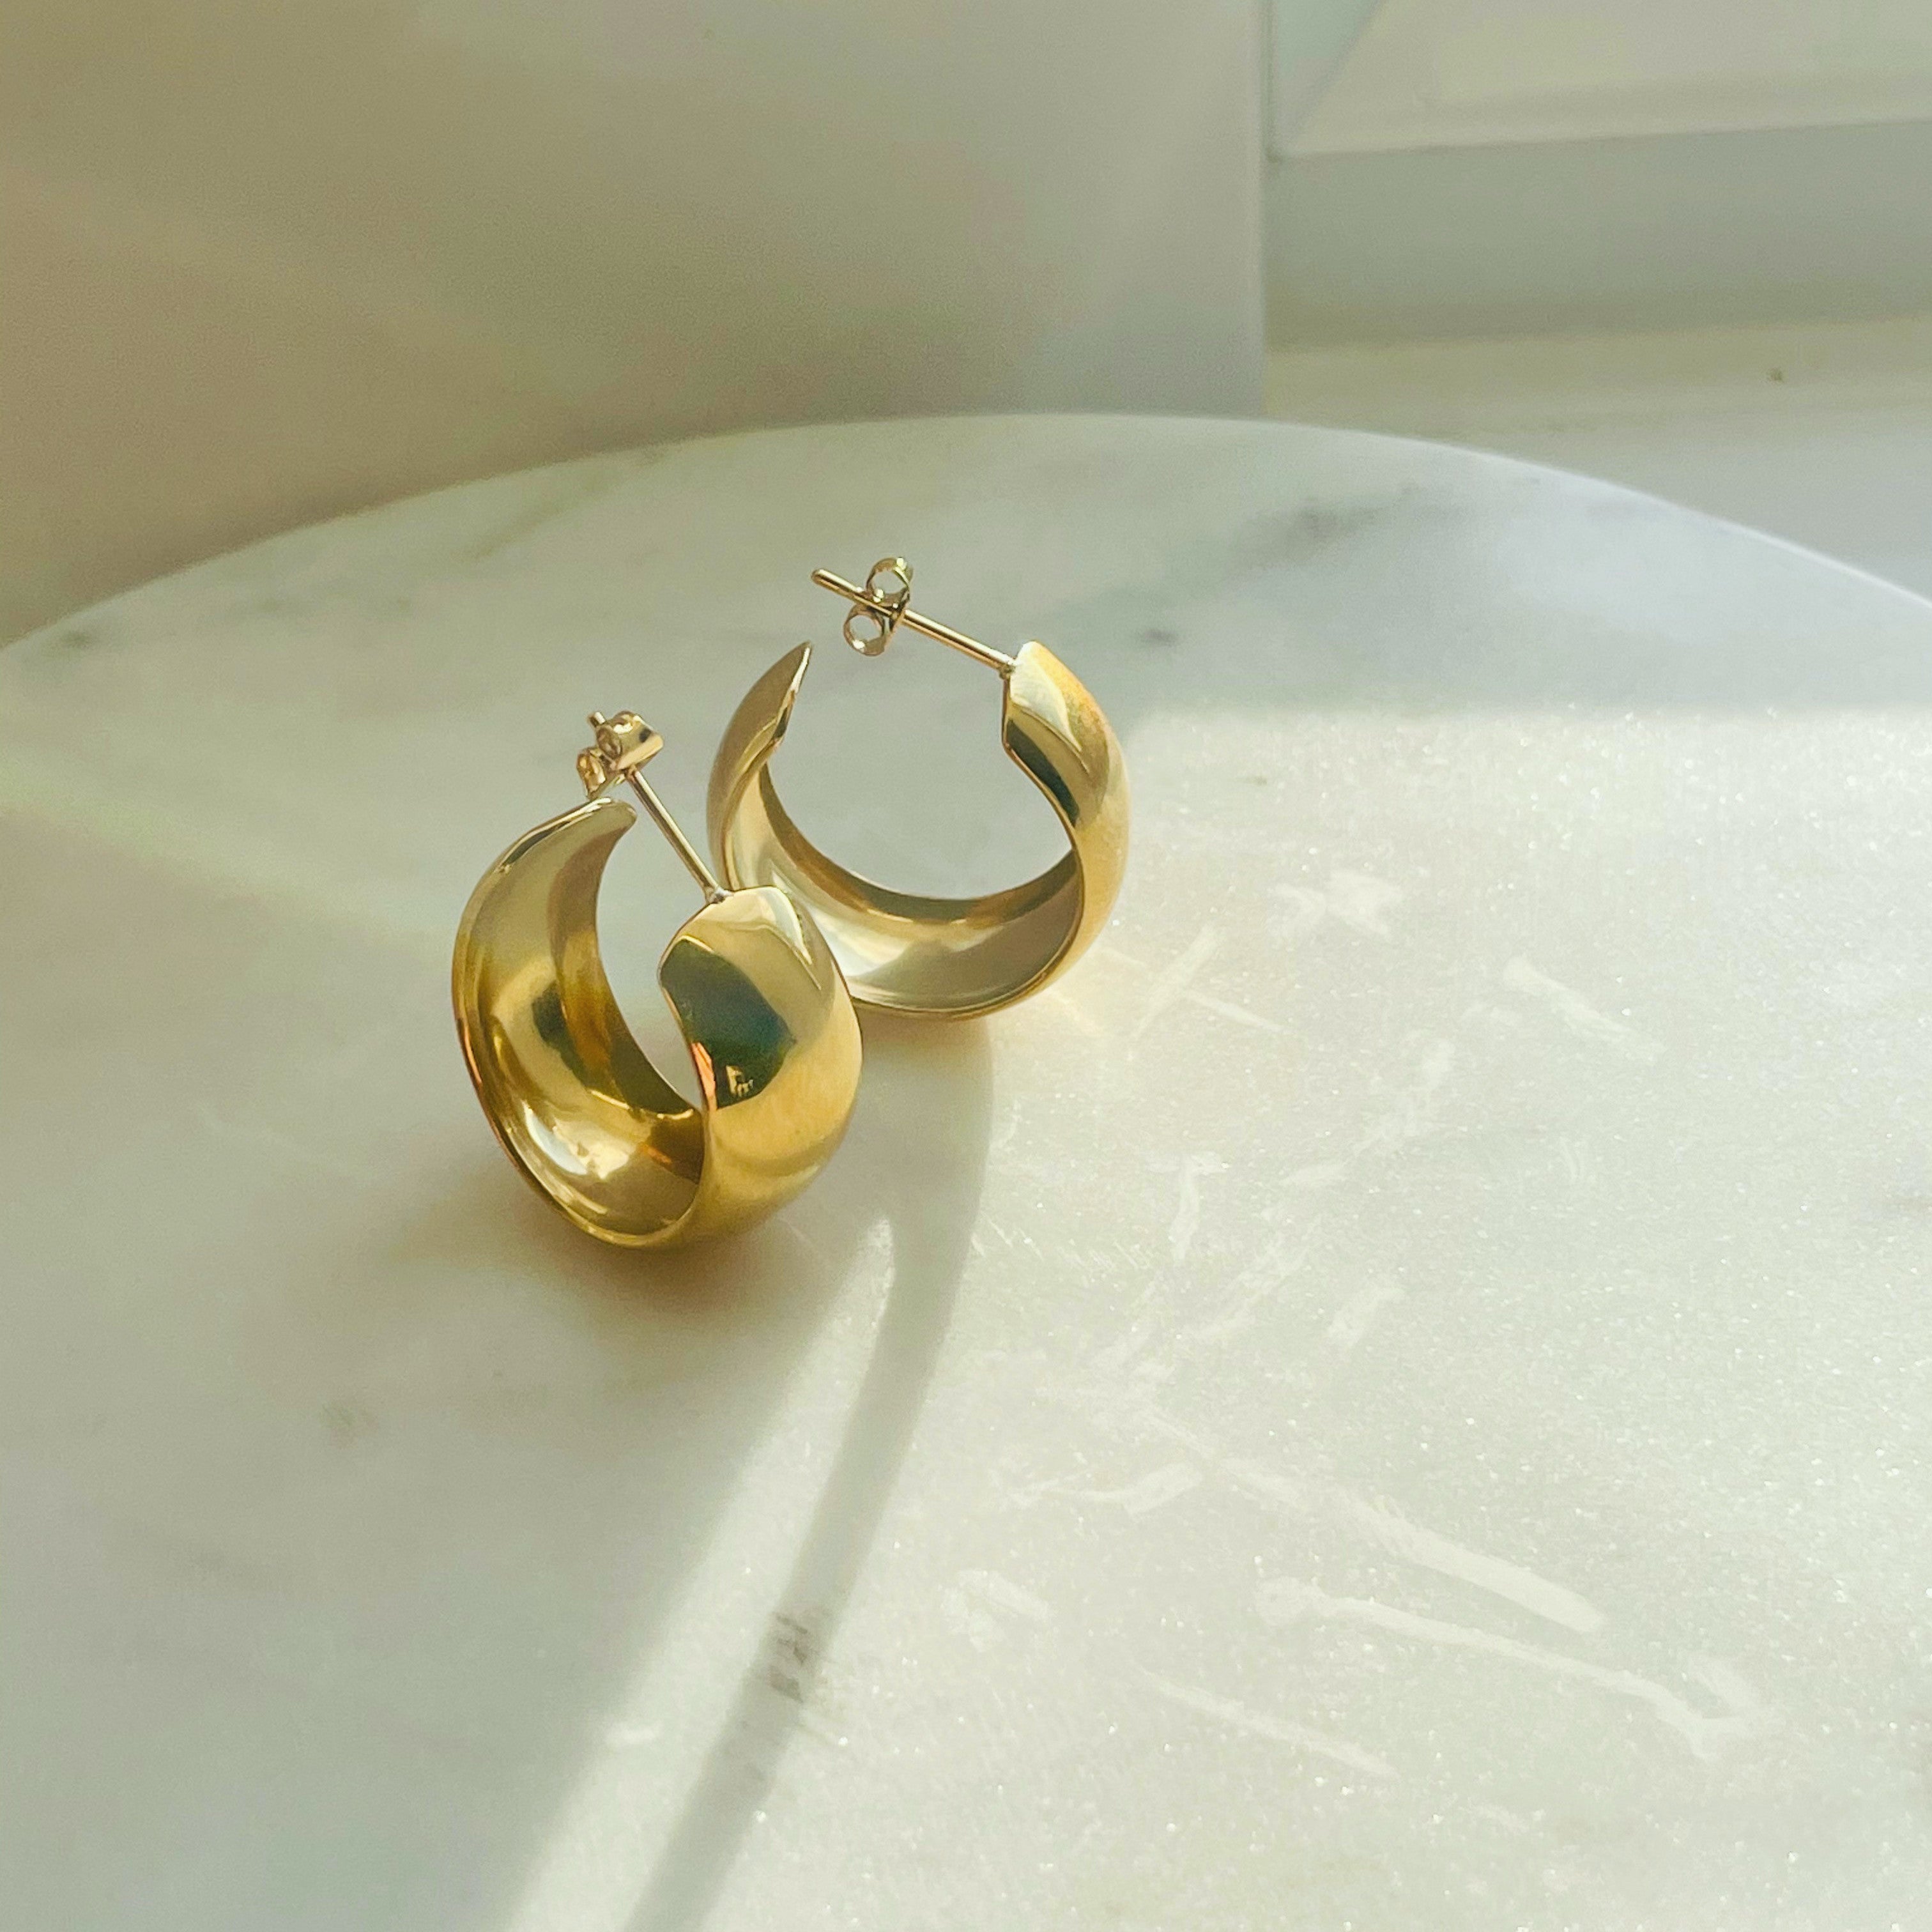 Chic Chunky Gold Hoops for Stylish Looks